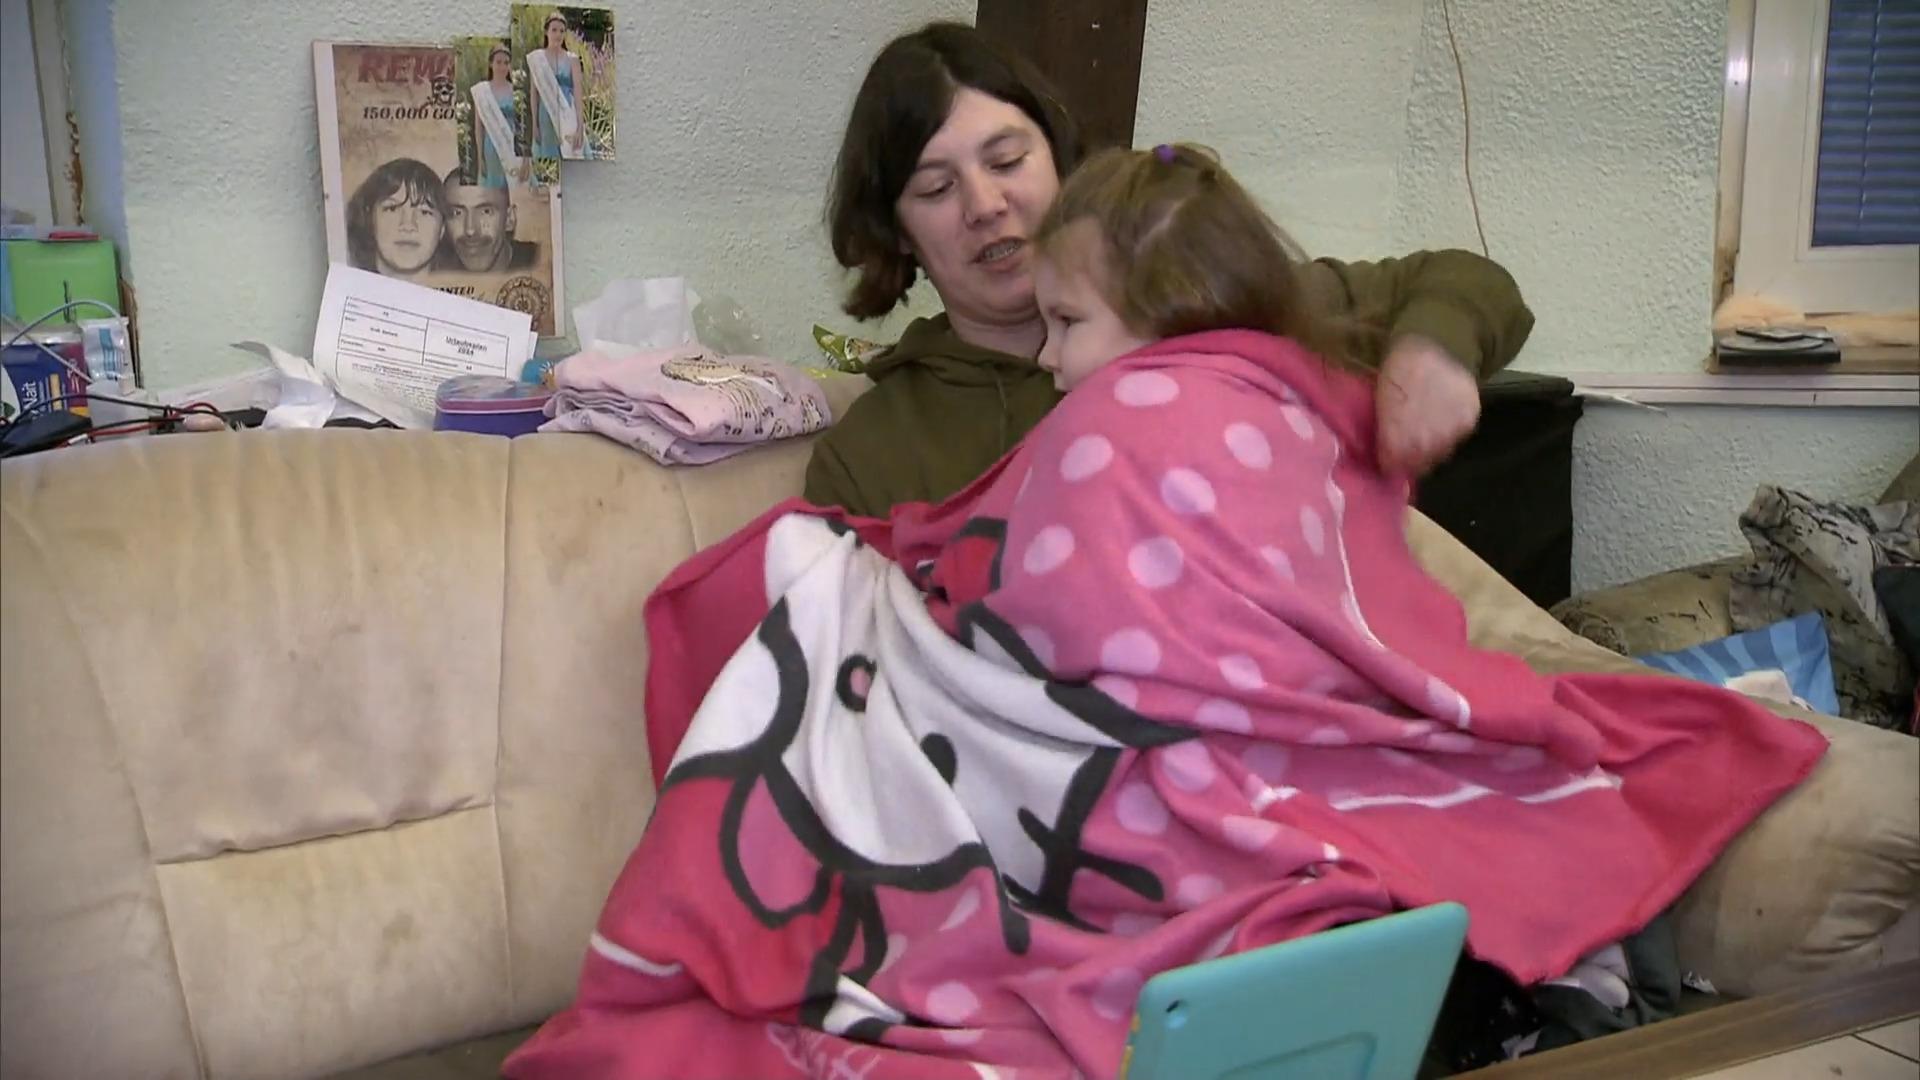 Tenants have been sitting in a cold apartment for months due to faulty heating